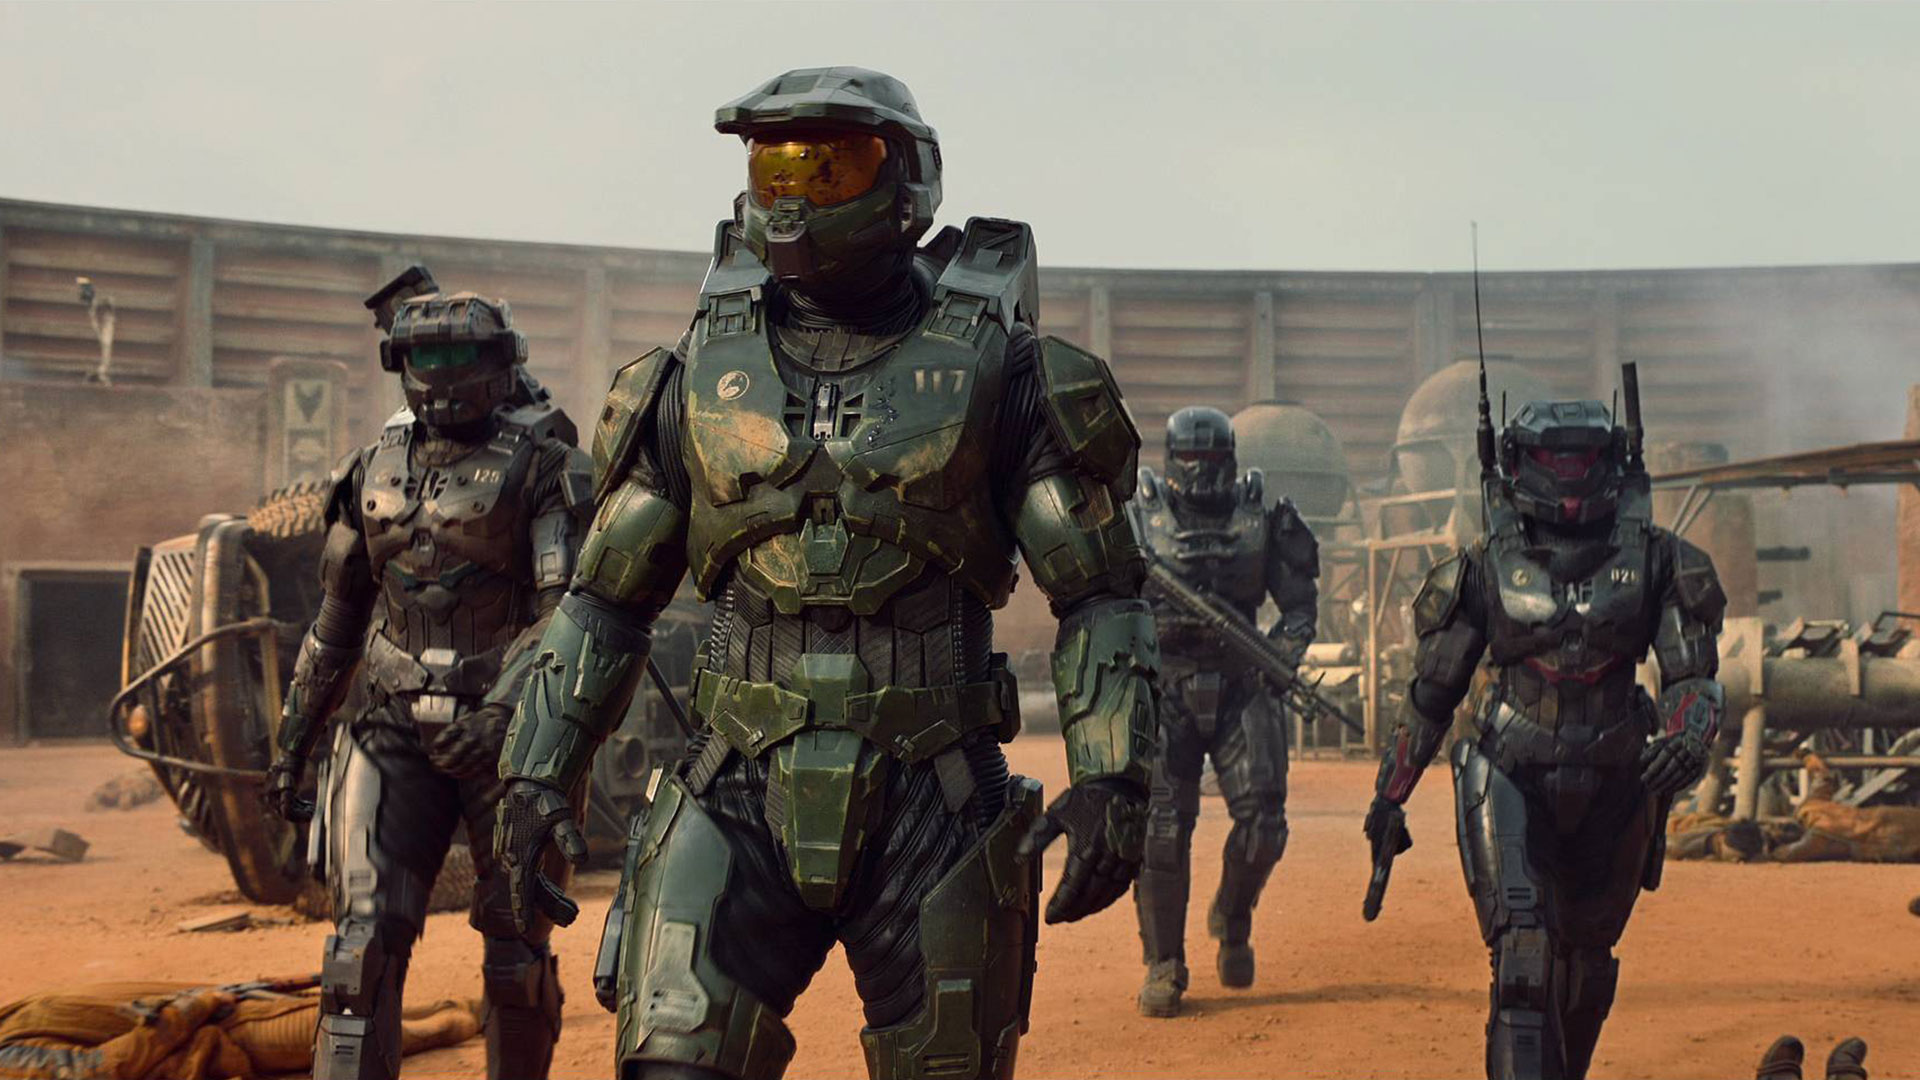 Halo actor Pablo Schreiber has a message for those who wanted the series to fail